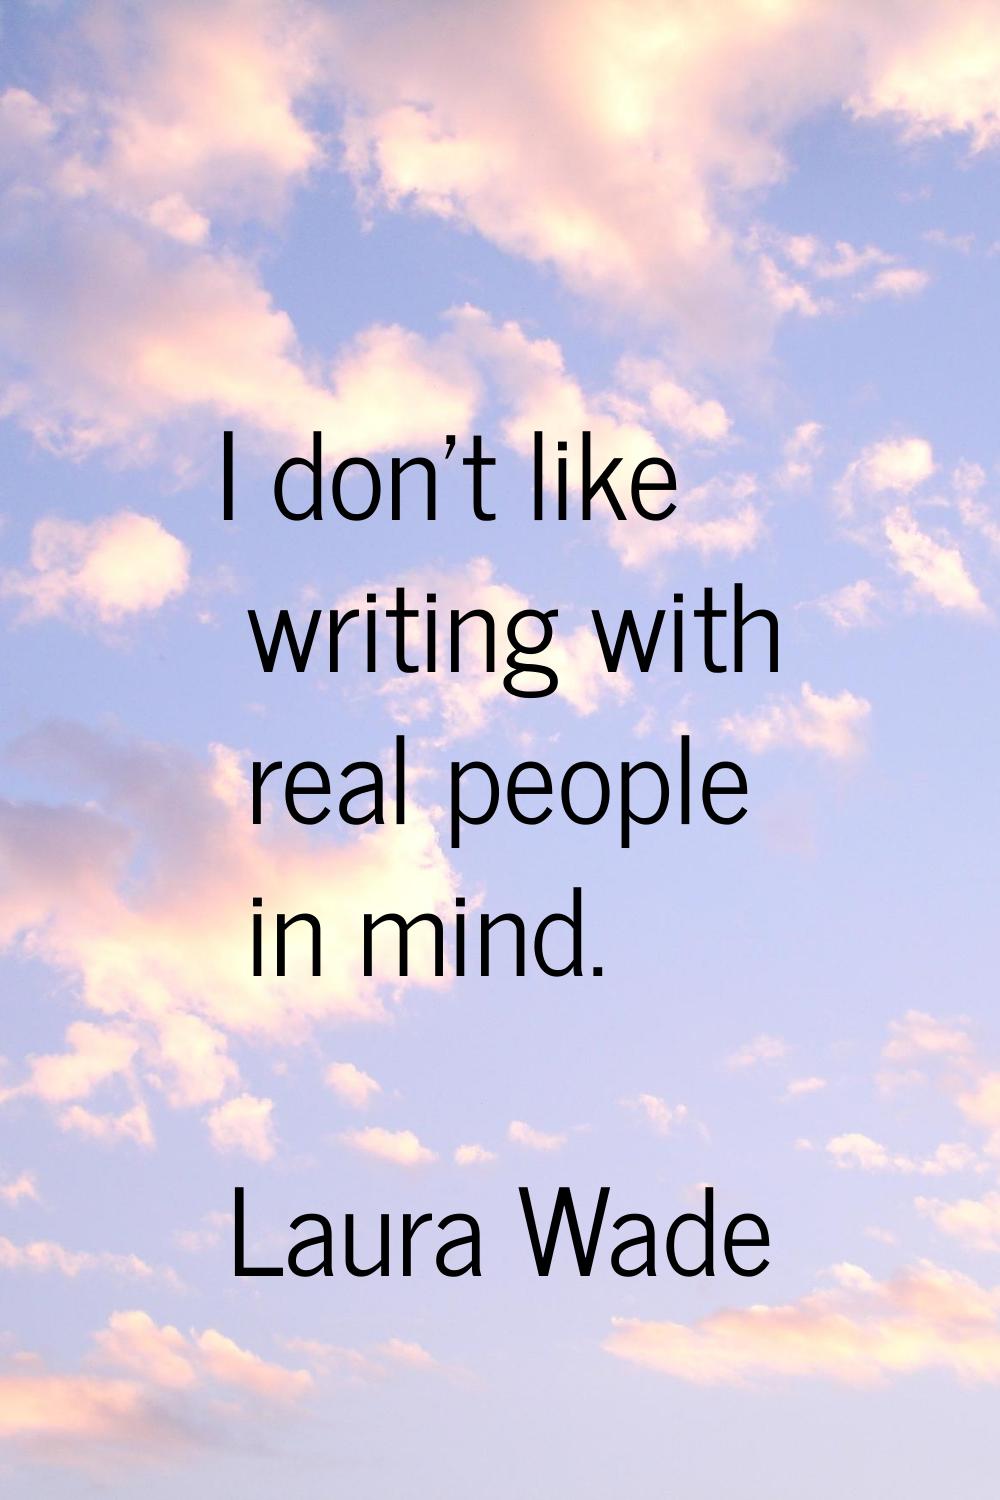 I don't like writing with real people in mind.